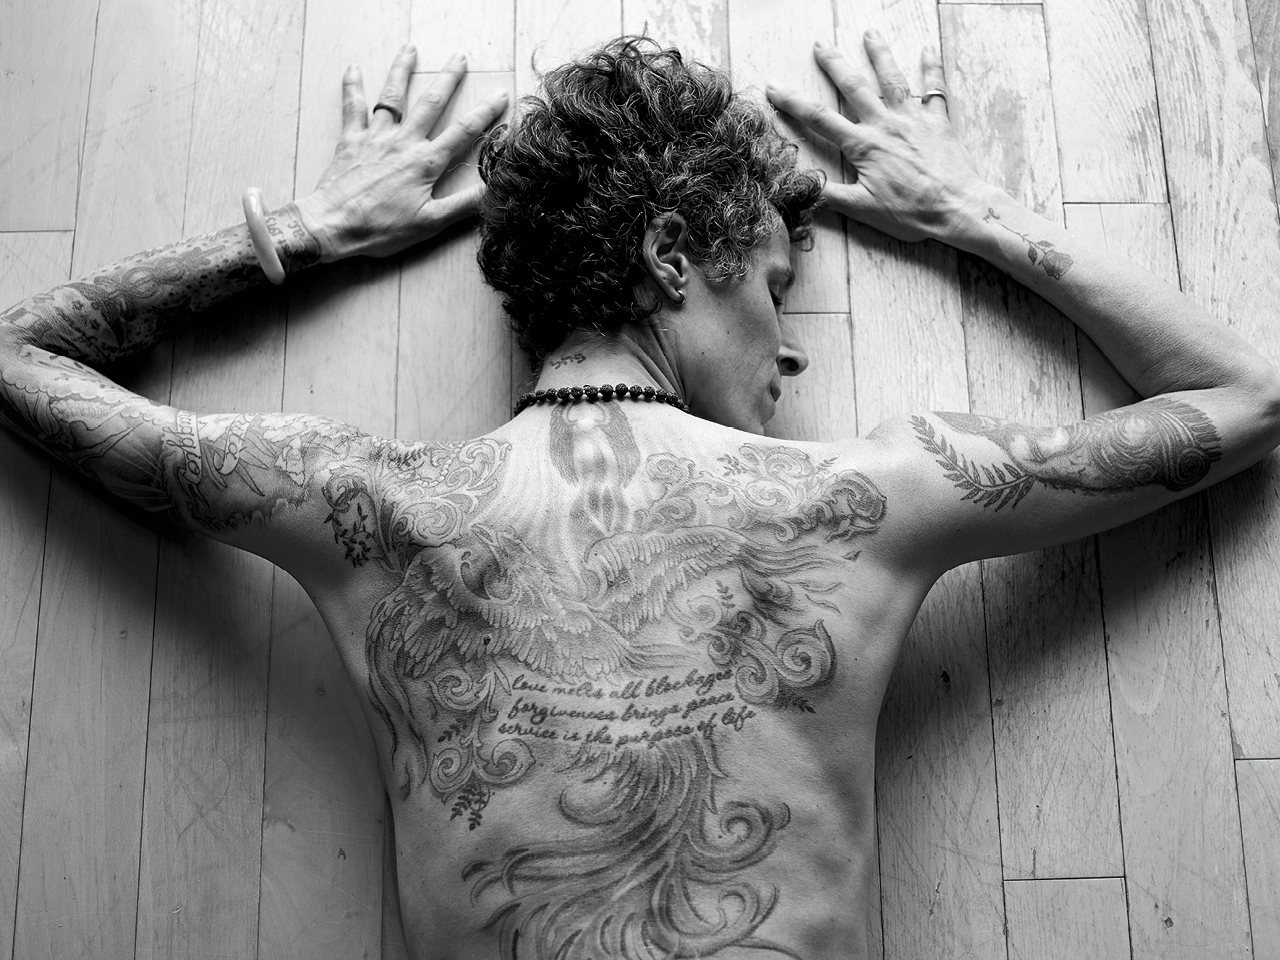 A photo of Andrea Constand's back tattoo, of a phoenix rising. Constand began sitting for the tattoo in the spring of 2017. “It was emblematic of the strength and perseverance I needed to rise above the difficulties and trauma I was experiencing. It also represented a desire to ‘rise from the ashes’ of my painful journey to healing,” she says. “It was completed around the sentencing, when I sat for the final touches.”